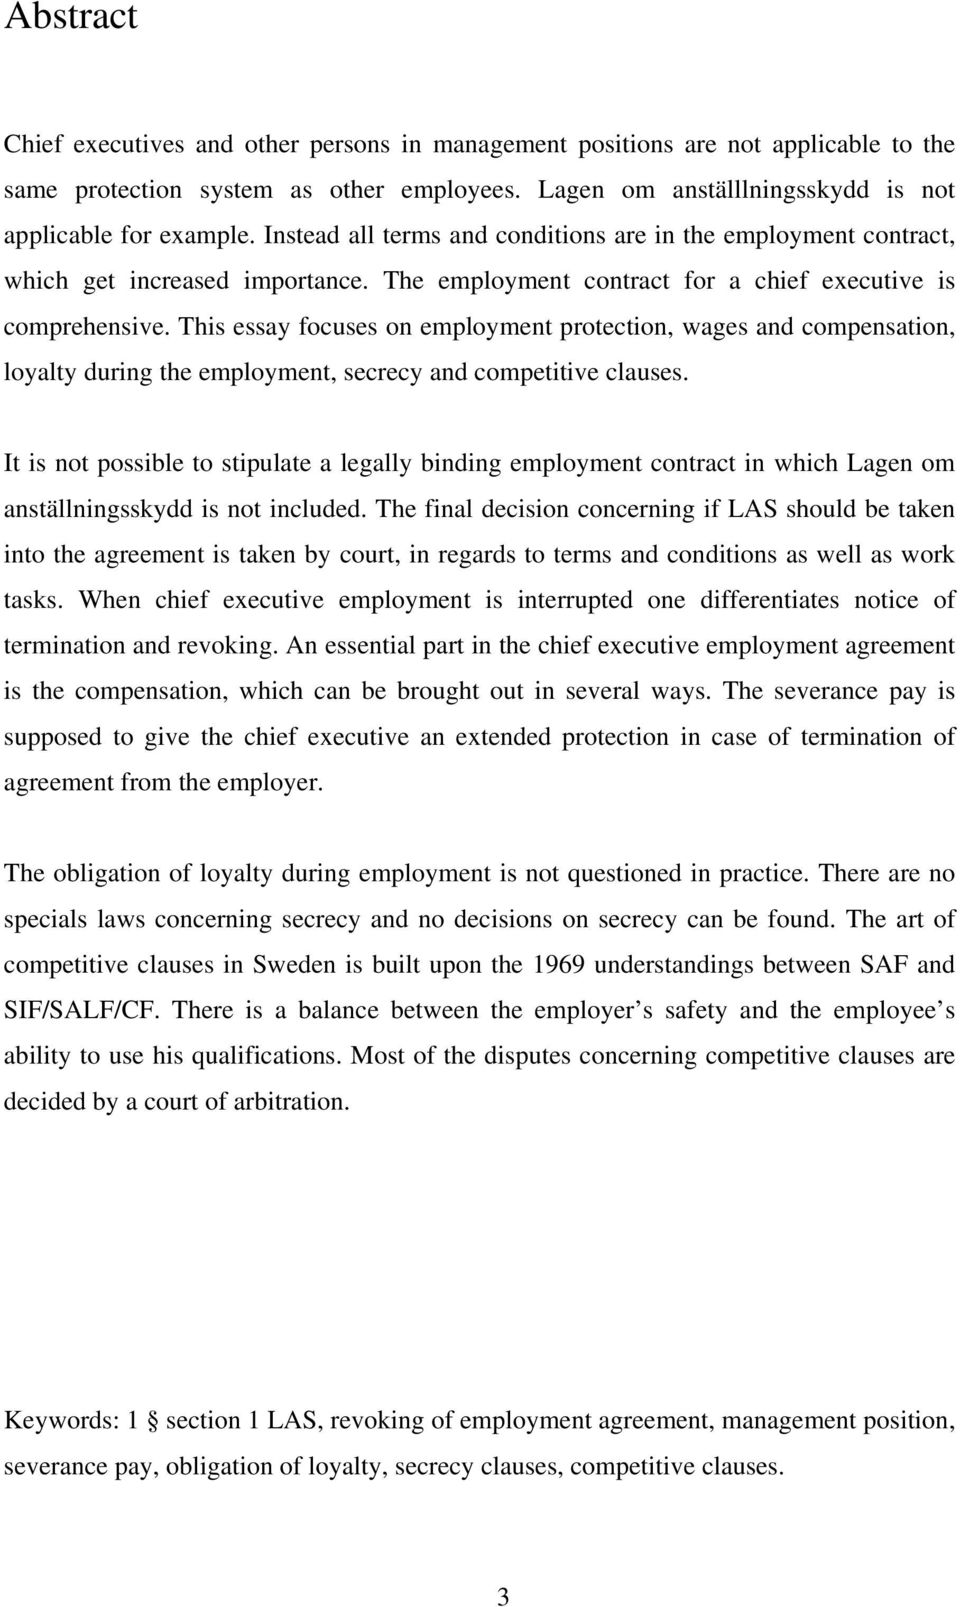 This essay focuses on employment protection, wages and compensation, loyalty during the employment, secrecy and competitive clauses.